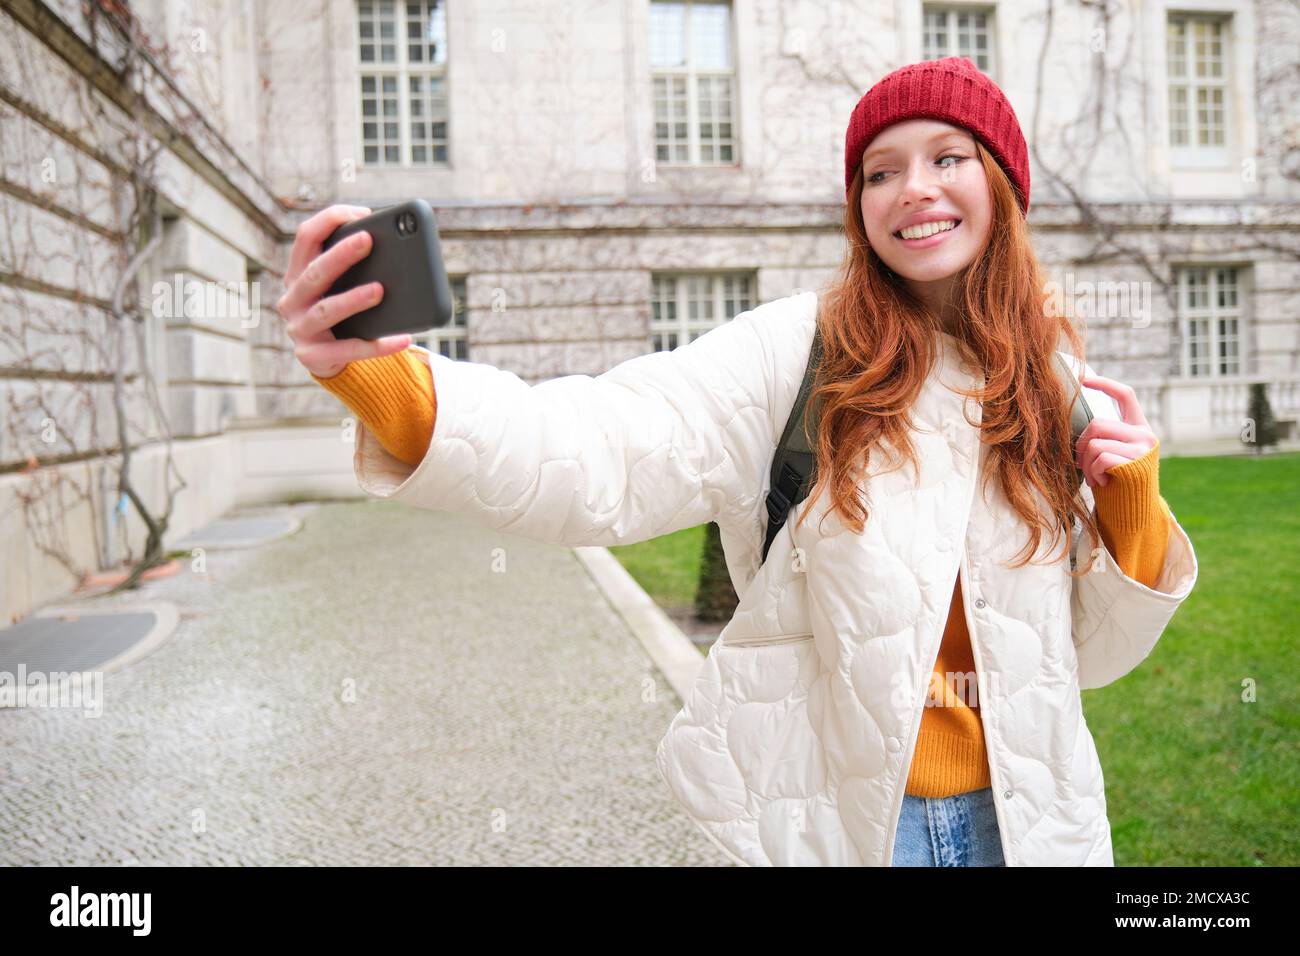 Portrait of happy girl tourist, takes selfie on smartphone in front of historical building, posing for photo on mobile phone camera Stock Photo